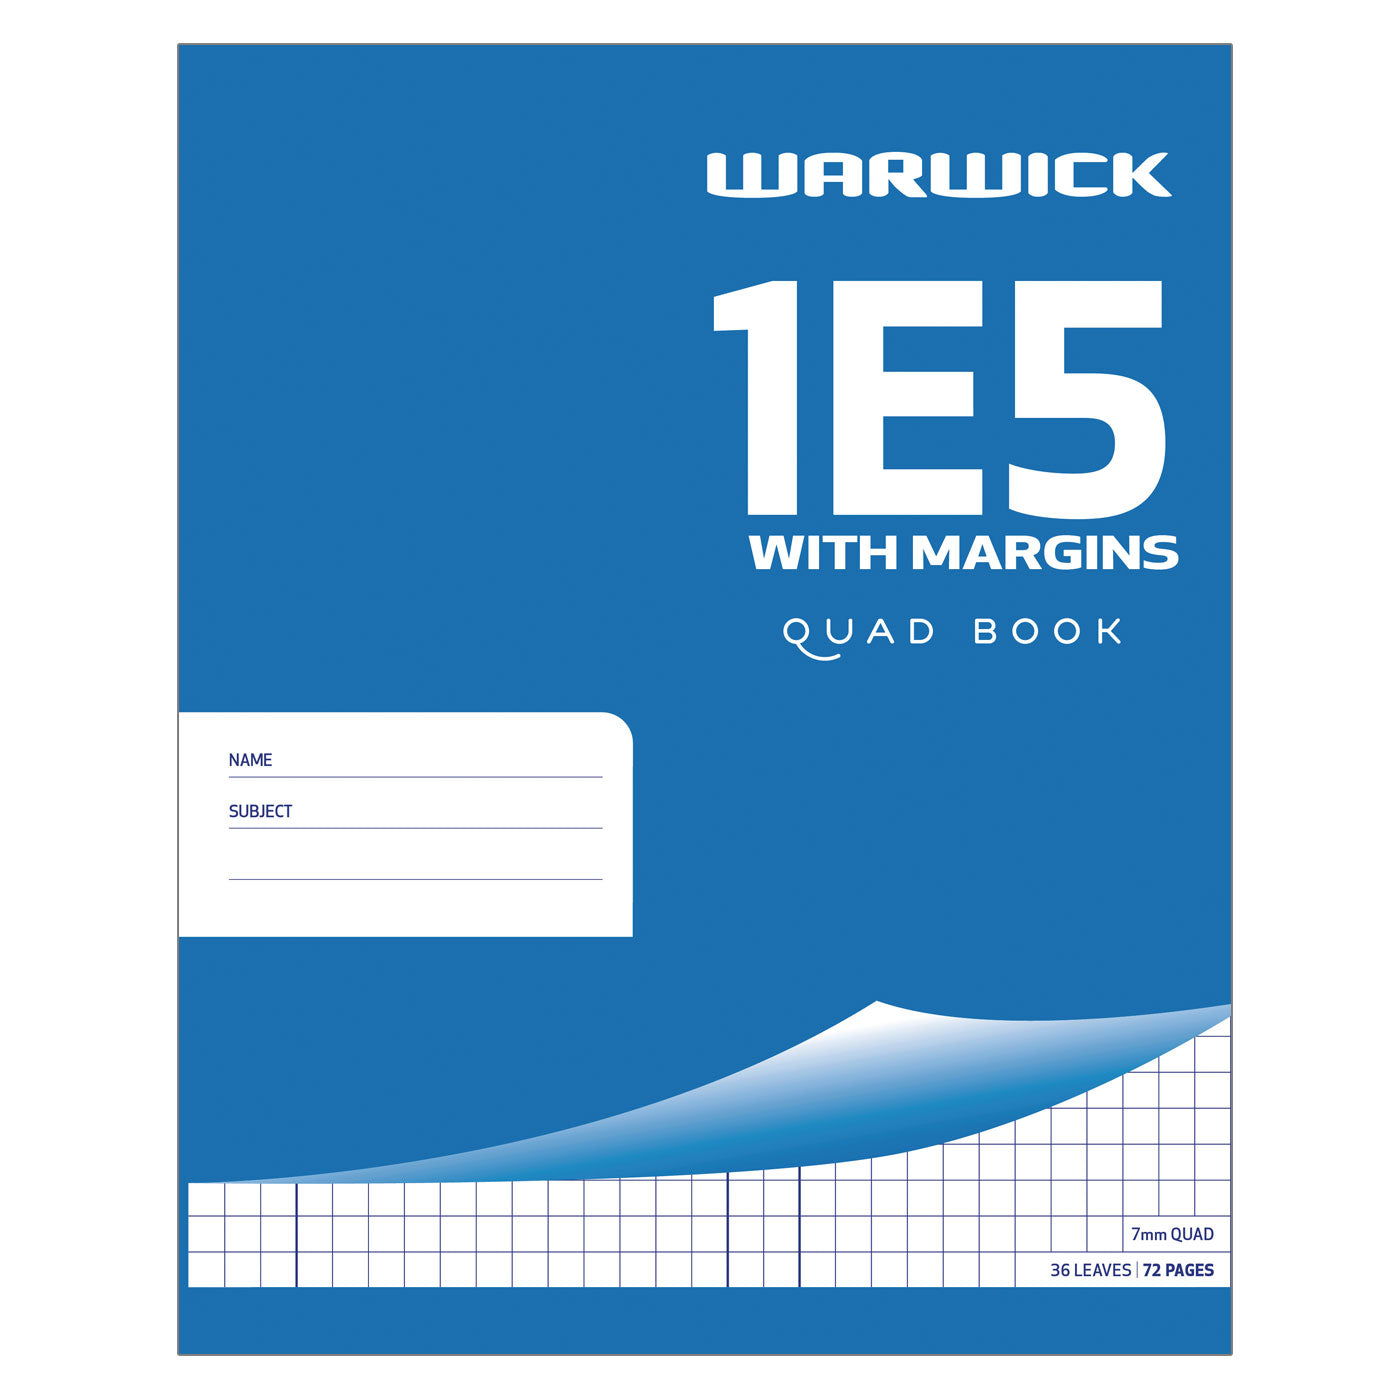 WARWICK EXERCISE BOOK 1E5 36 LEAF WITH MARGIN QUAD 7MM 255X205MM